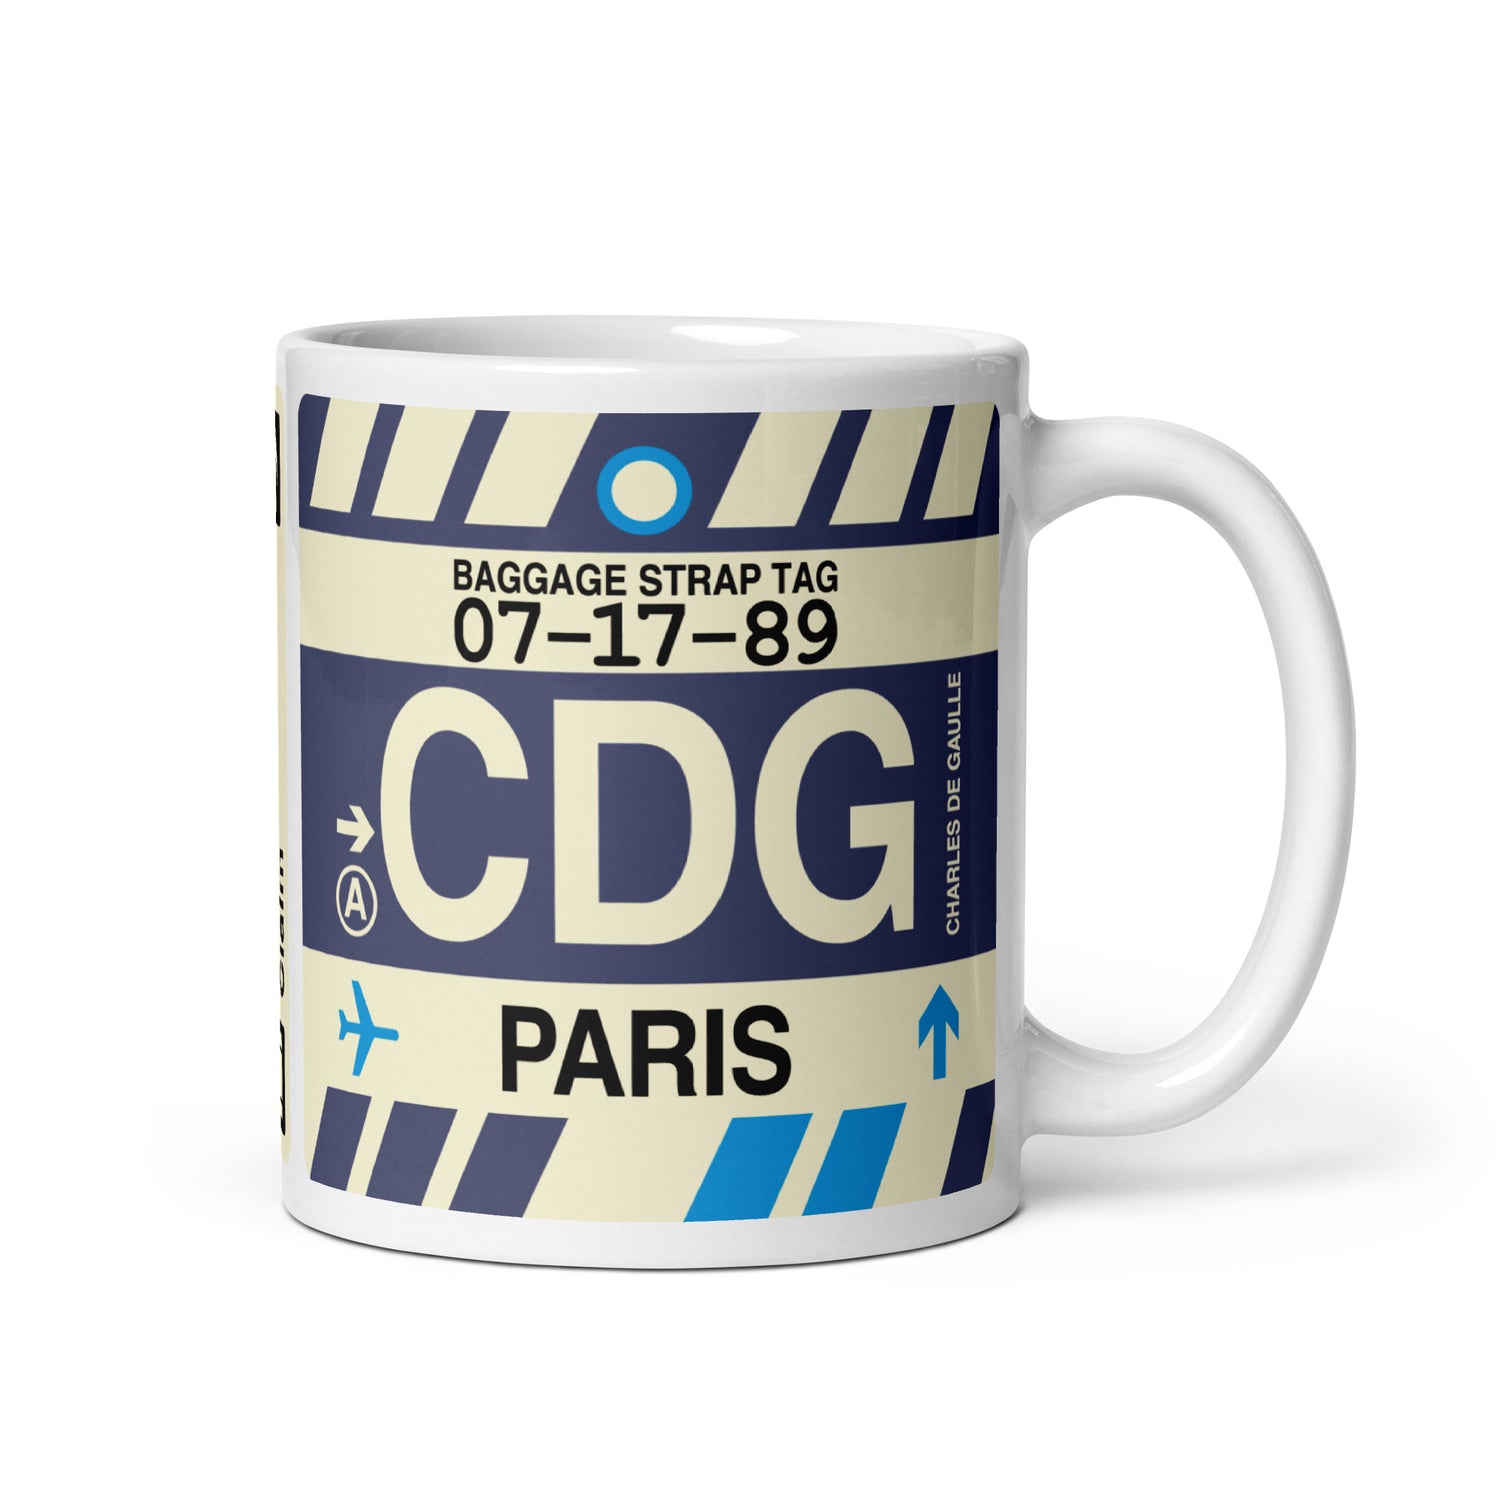 Paris France Coffee Mugs and Water Bottles • CDG Airport Code